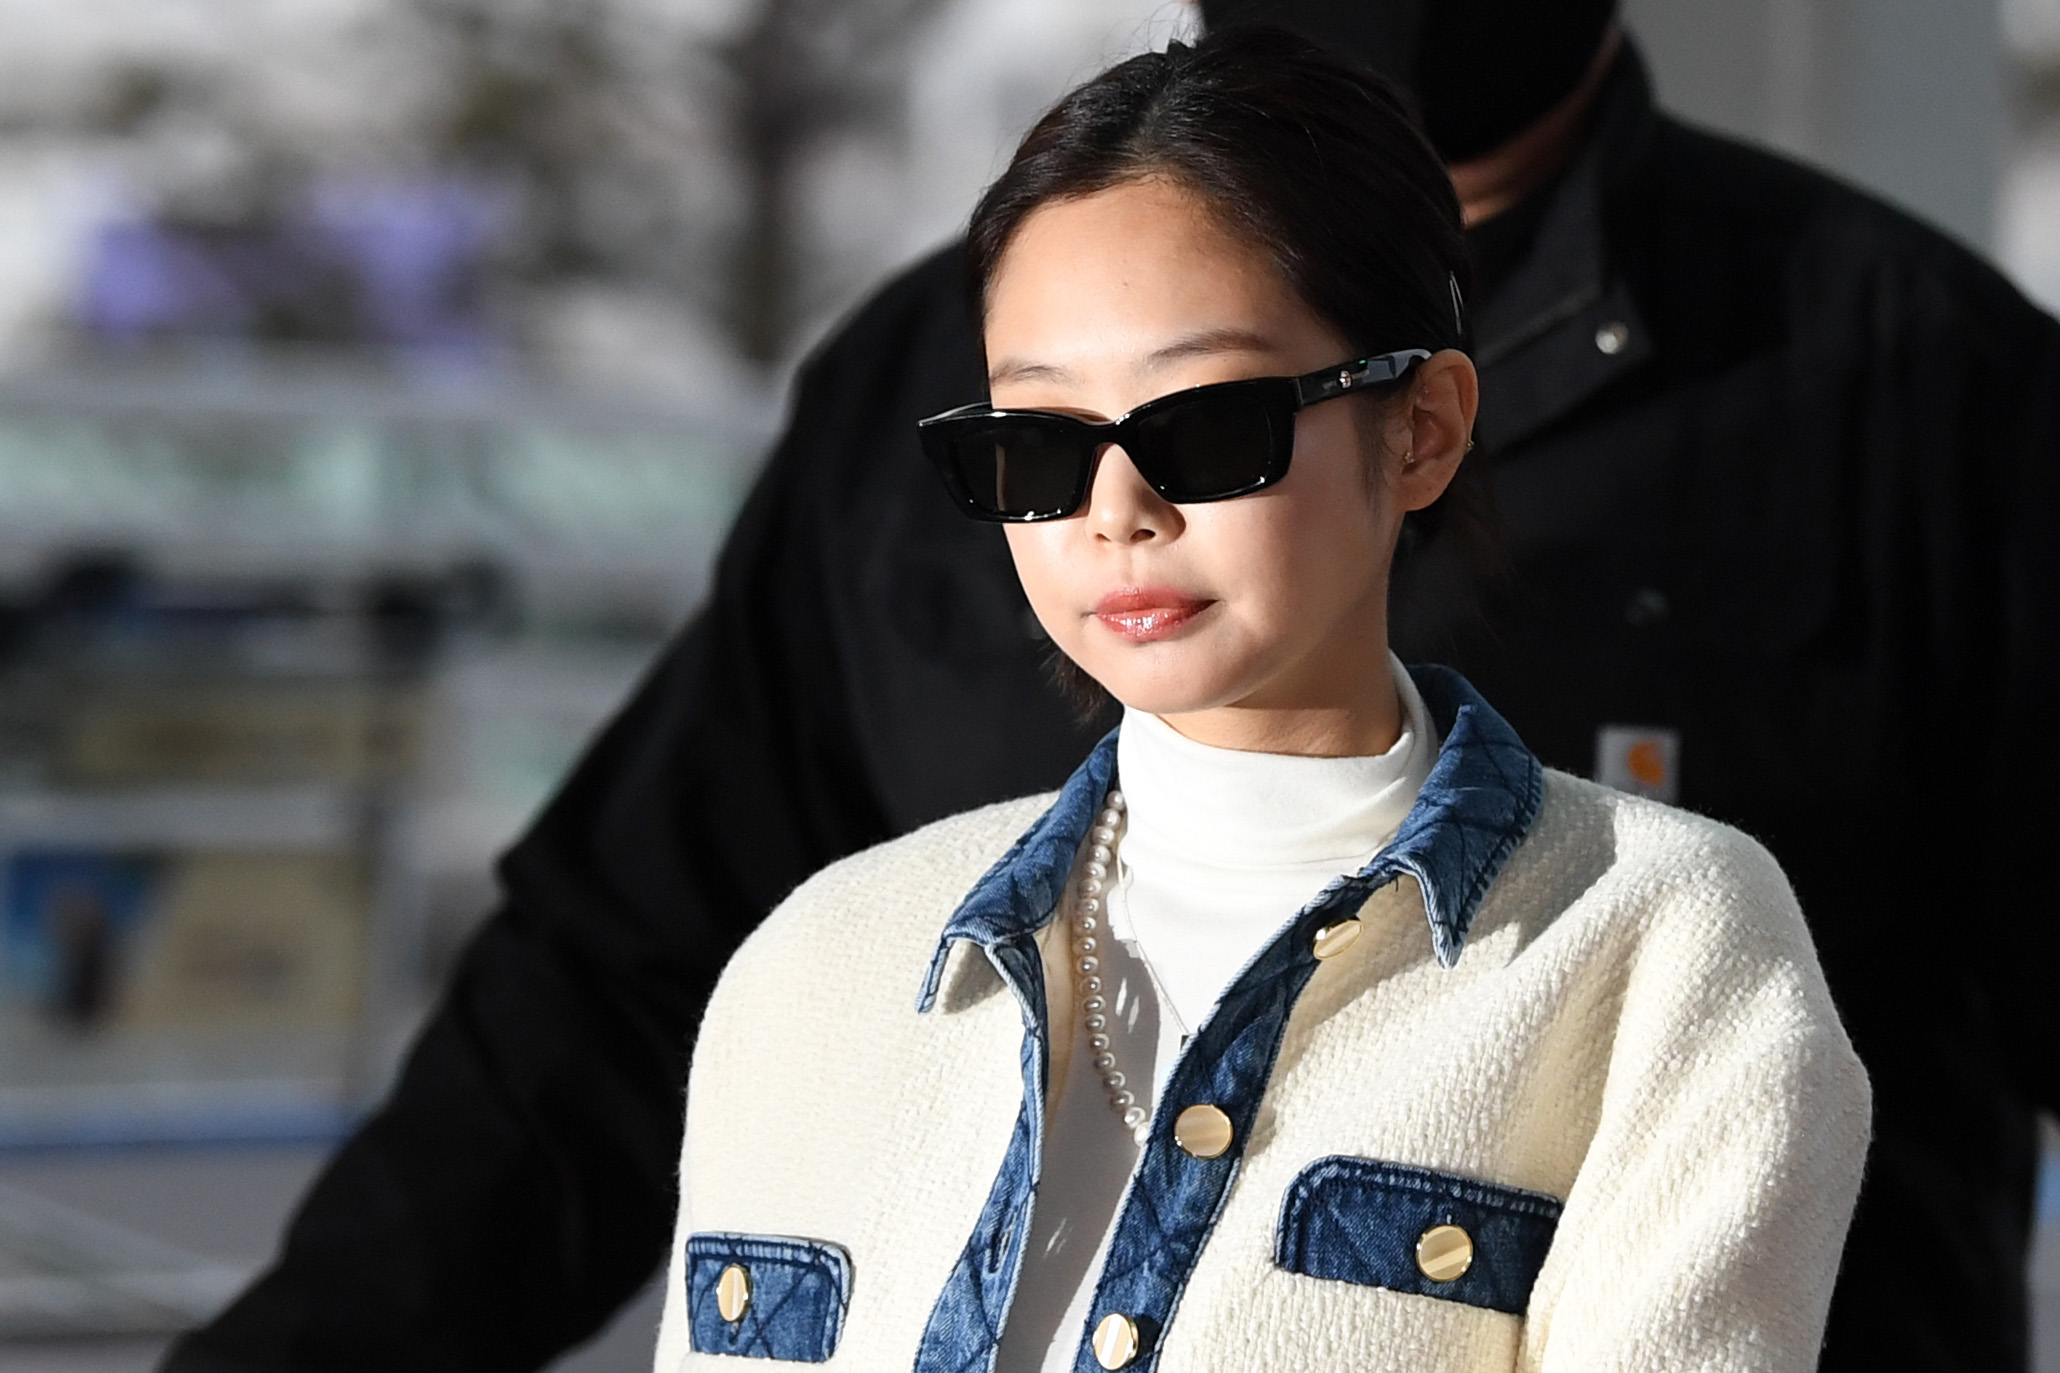 Jennie of BLACKPINK is seen upon departing at Incheon International Airport